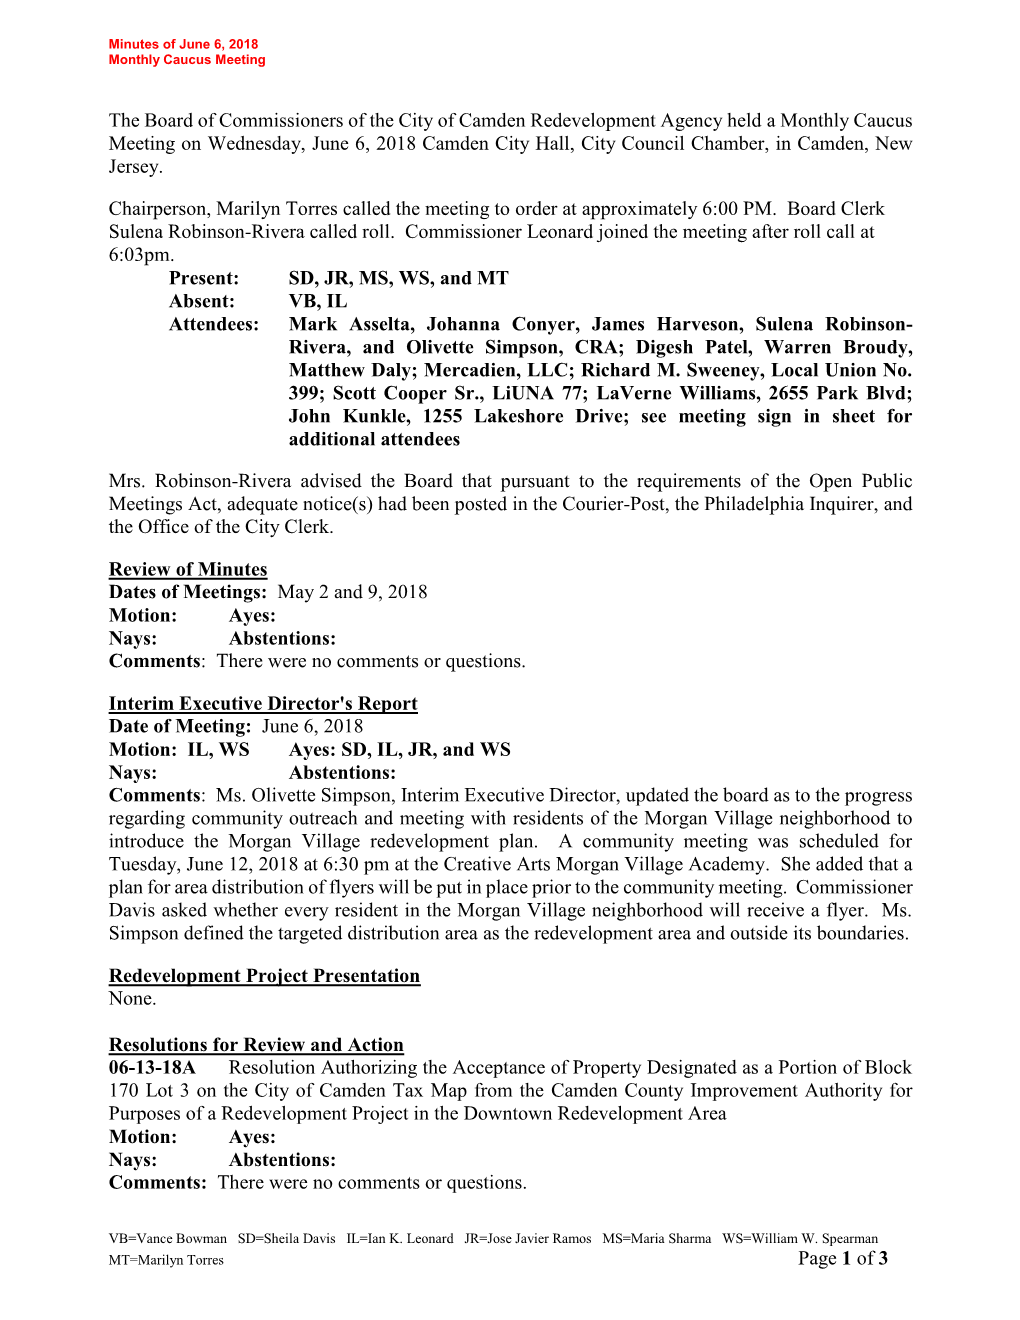 Page 1 of 3 the Board of Commissioners of the City of Camden